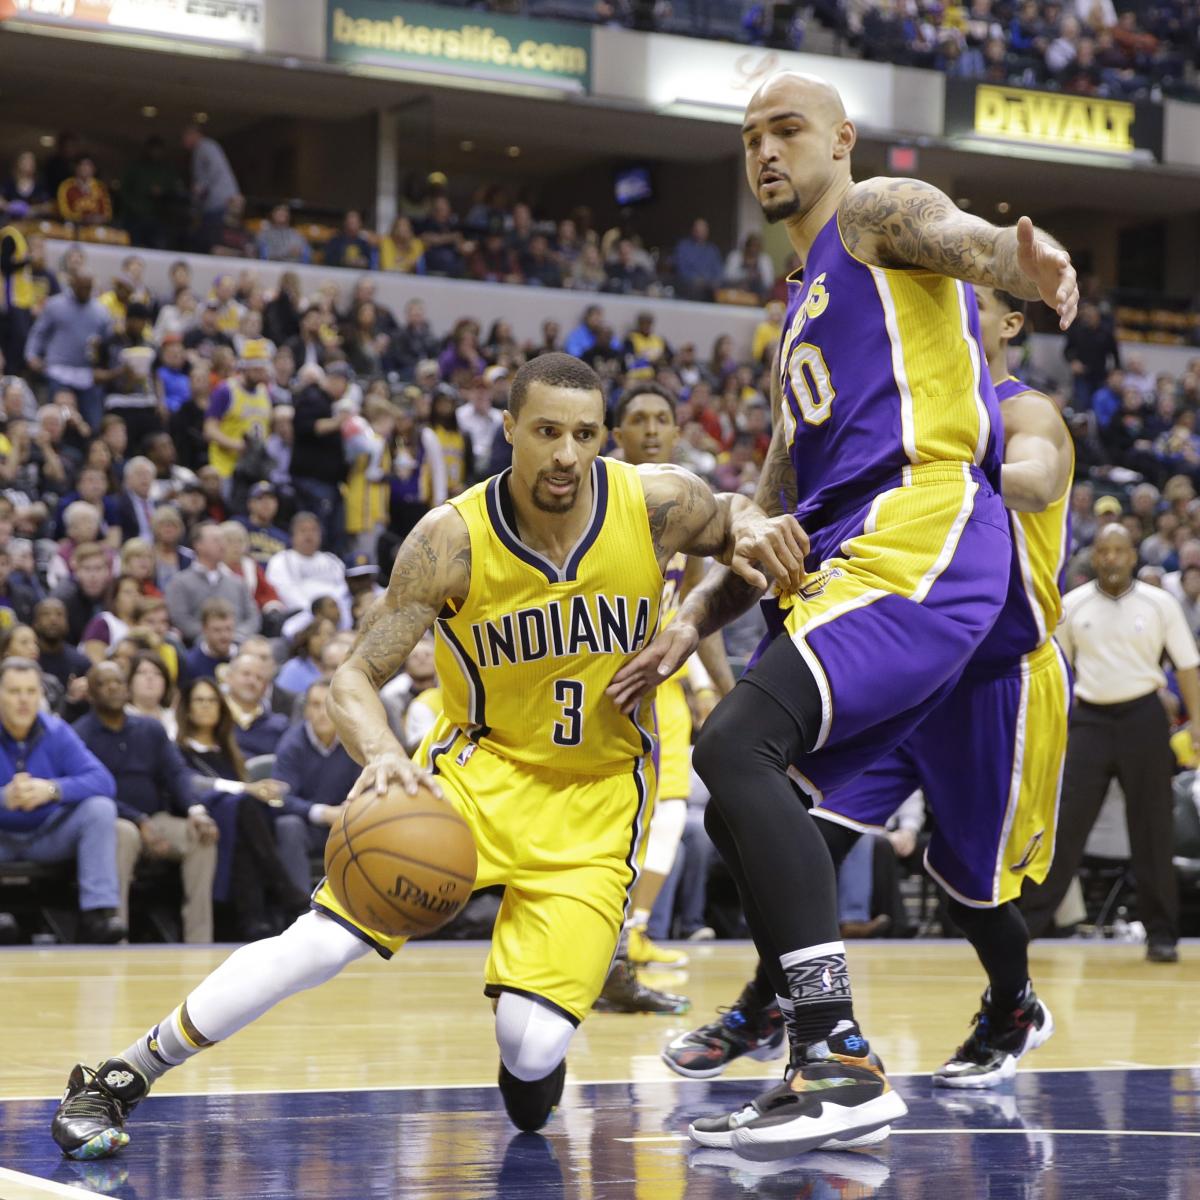 Lakers vs. Pacers Score, Video Highlights and Recap from Feb. 8 News